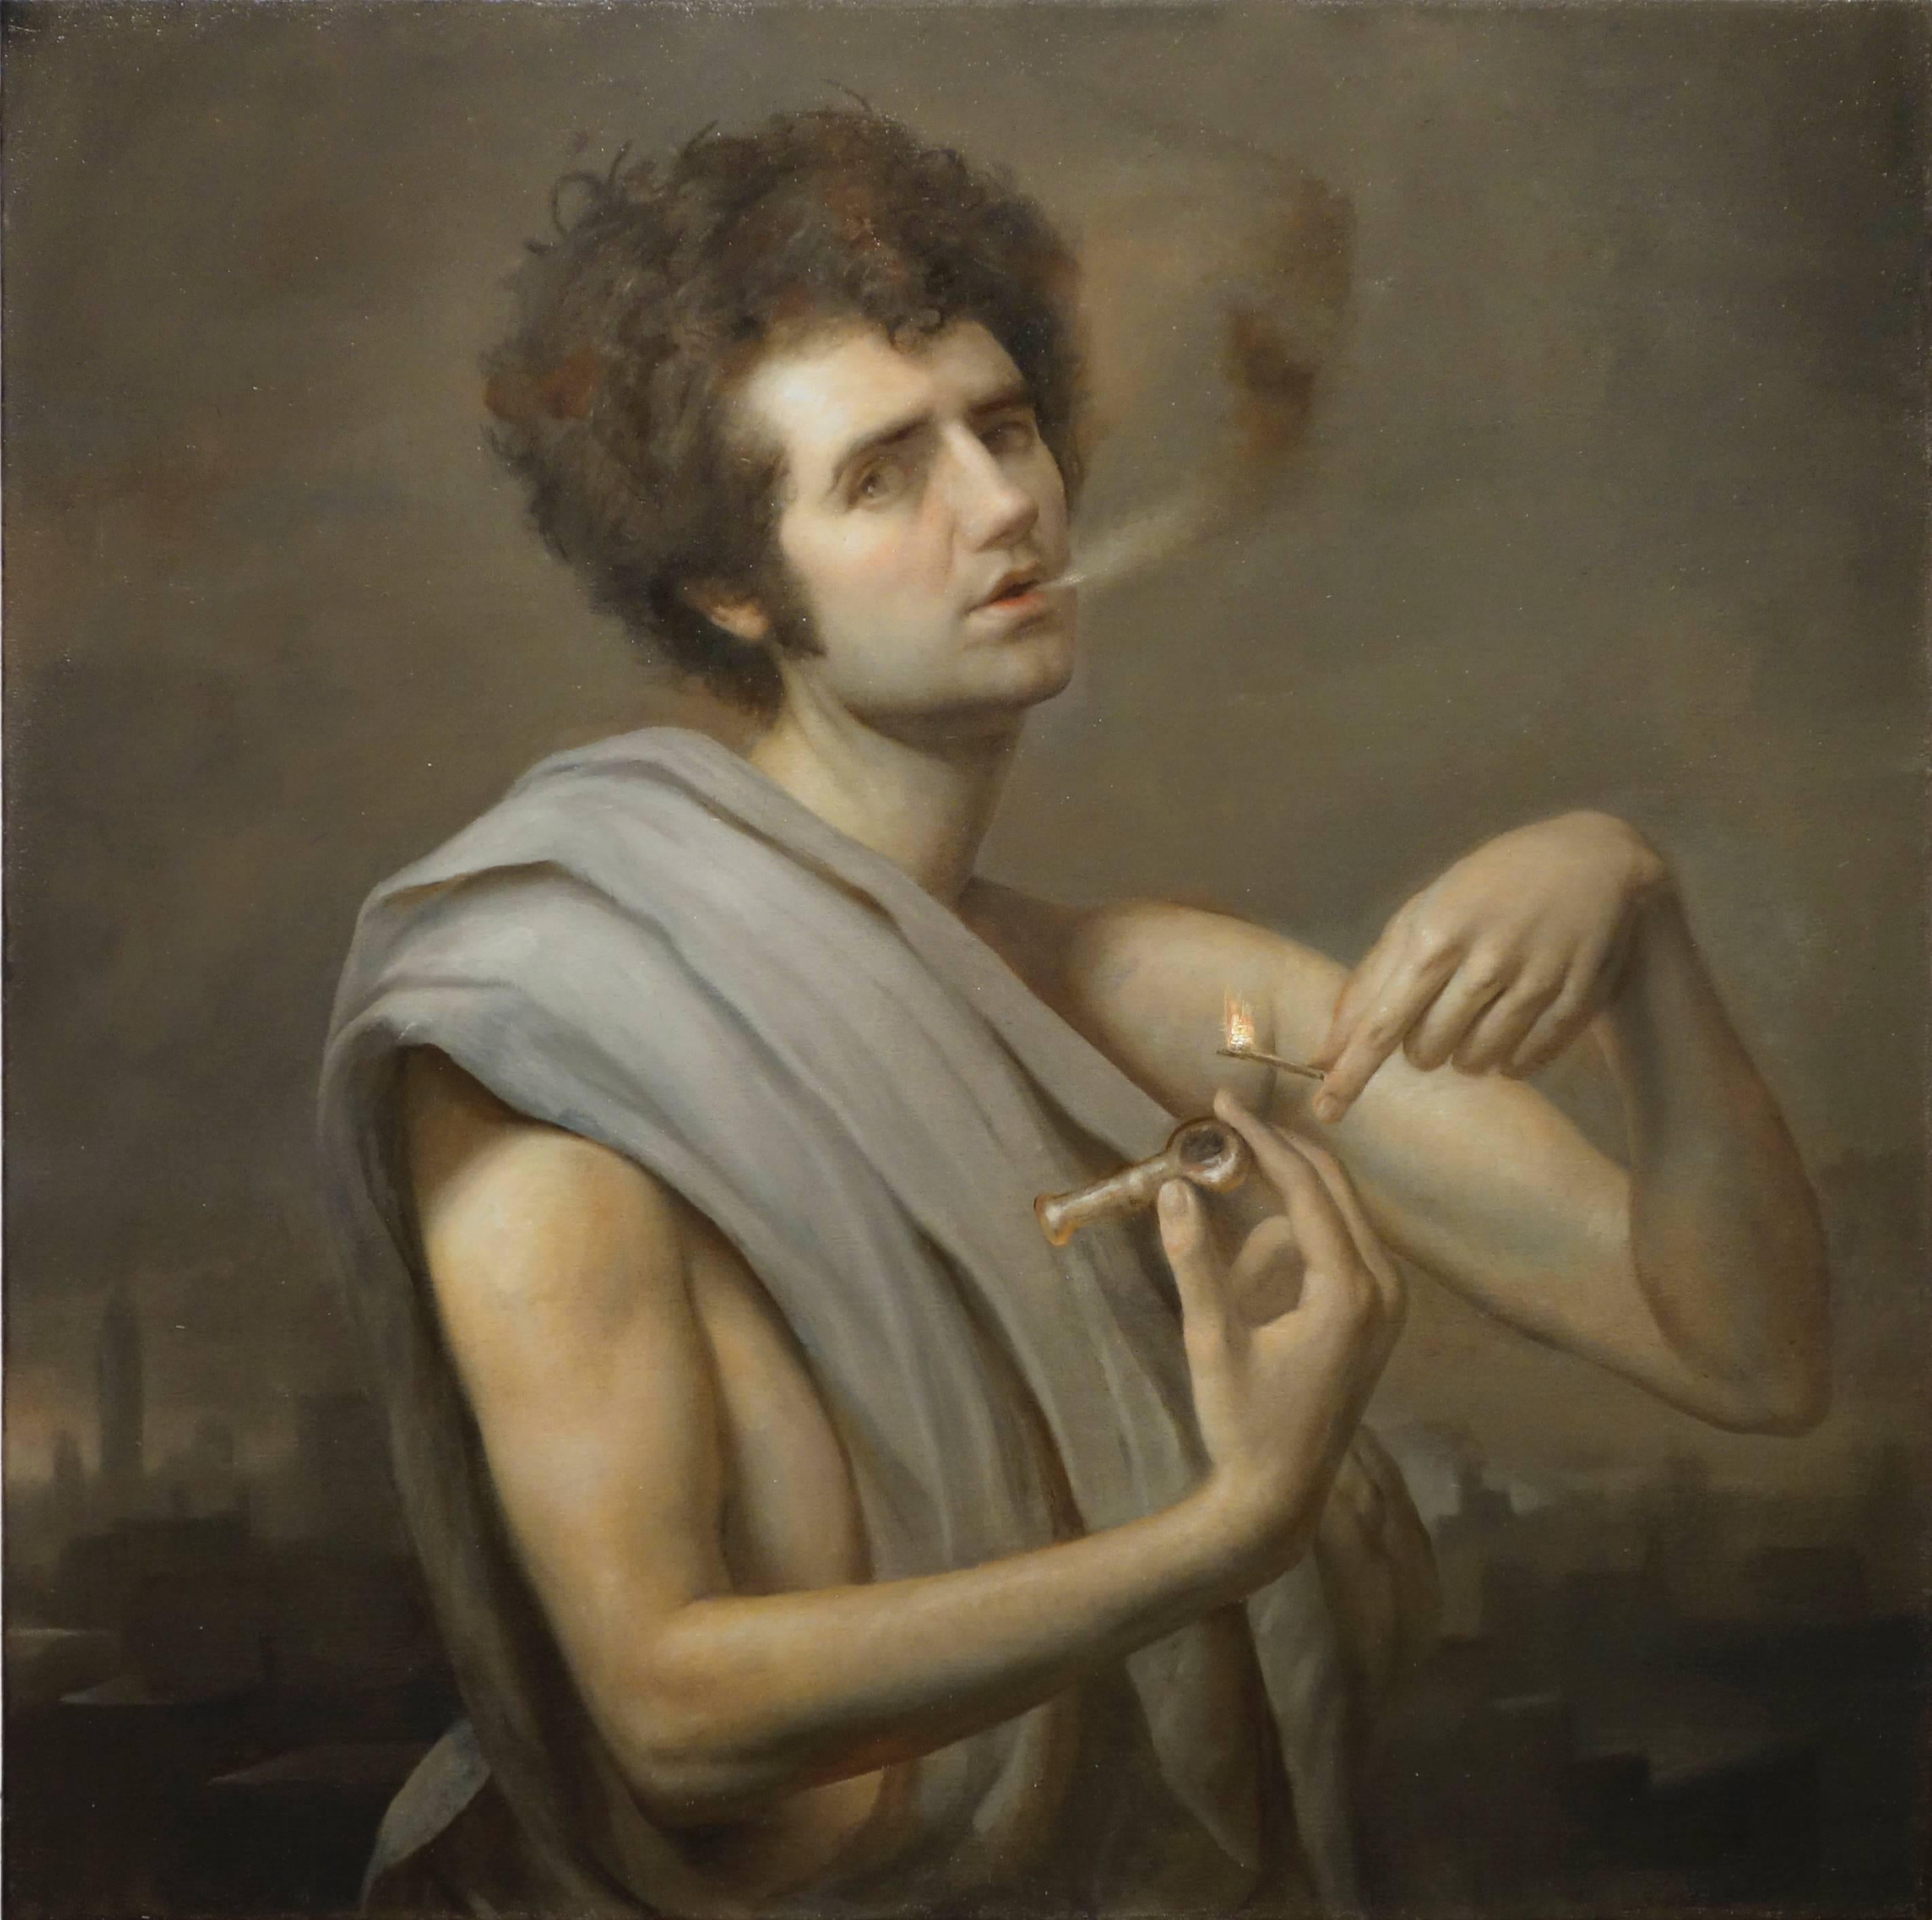 Adam Miller Figurative Painting - BACCHUS WITH PIPE, portrait, hyper-realistic, smoking, pipe, curly hair